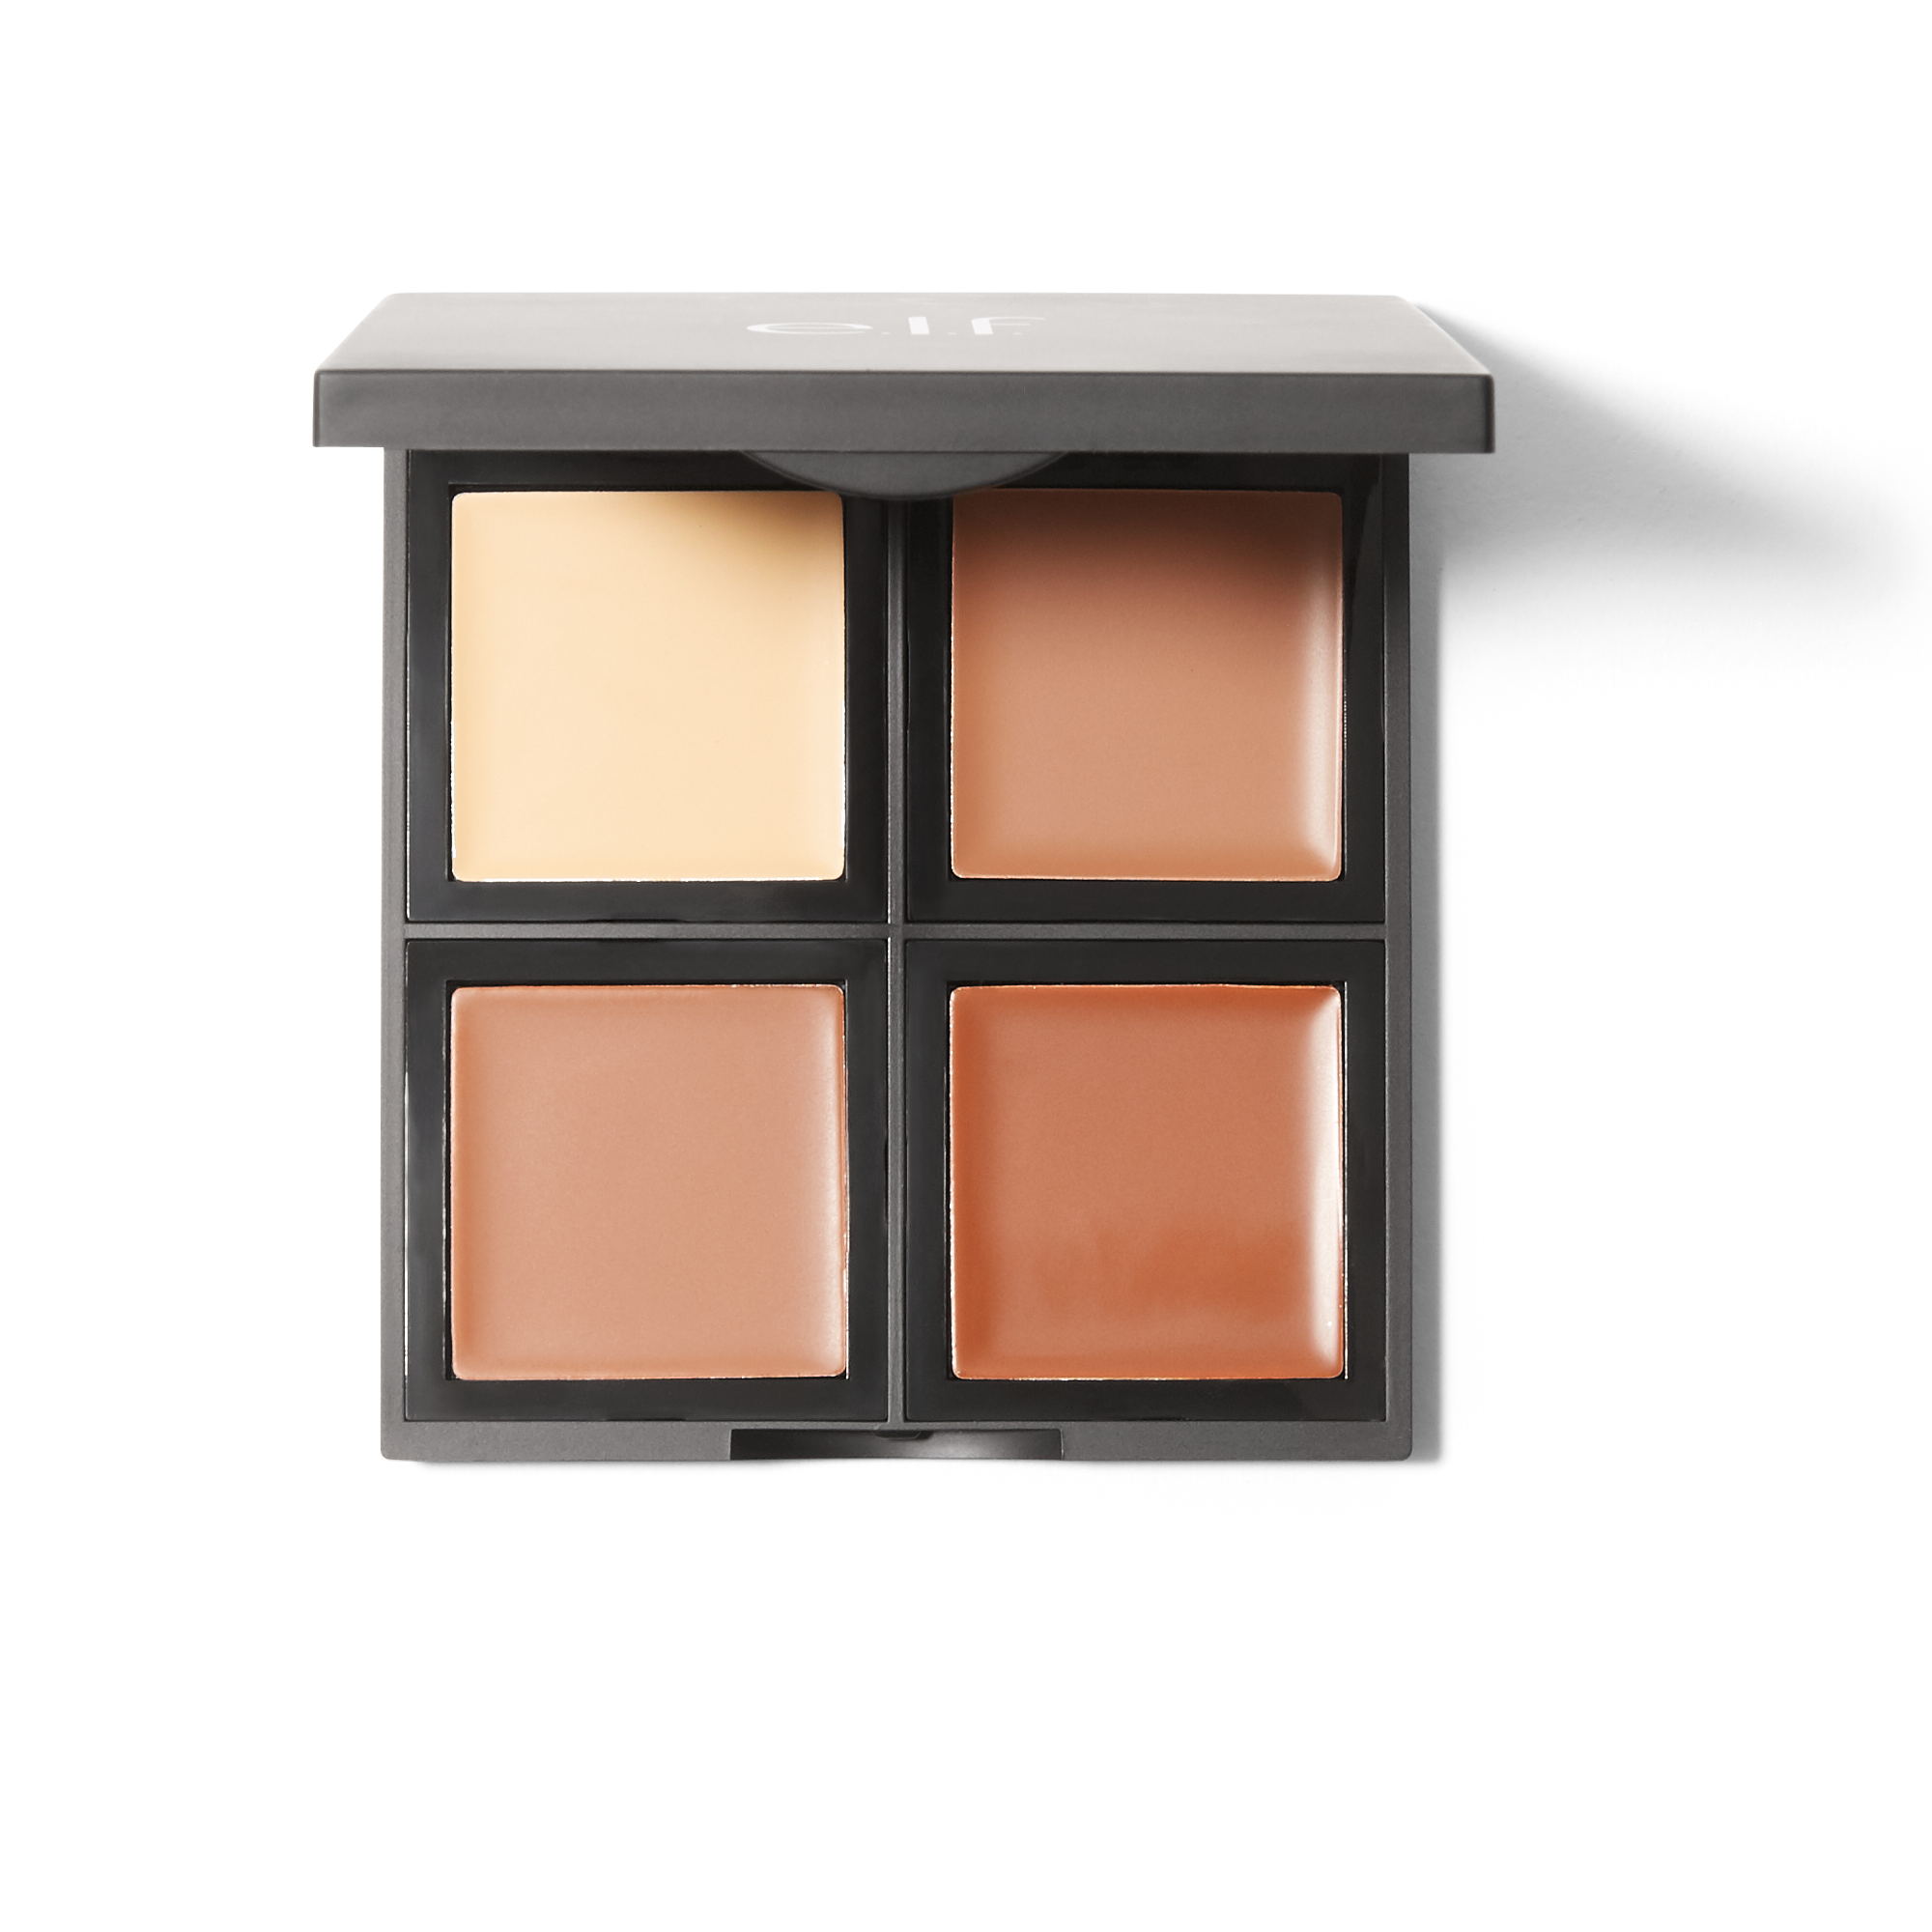 e.l.f. Cosmetics on Instagram: “Here's how we use our NEW Contour Palette  to get he perfect soft contour…